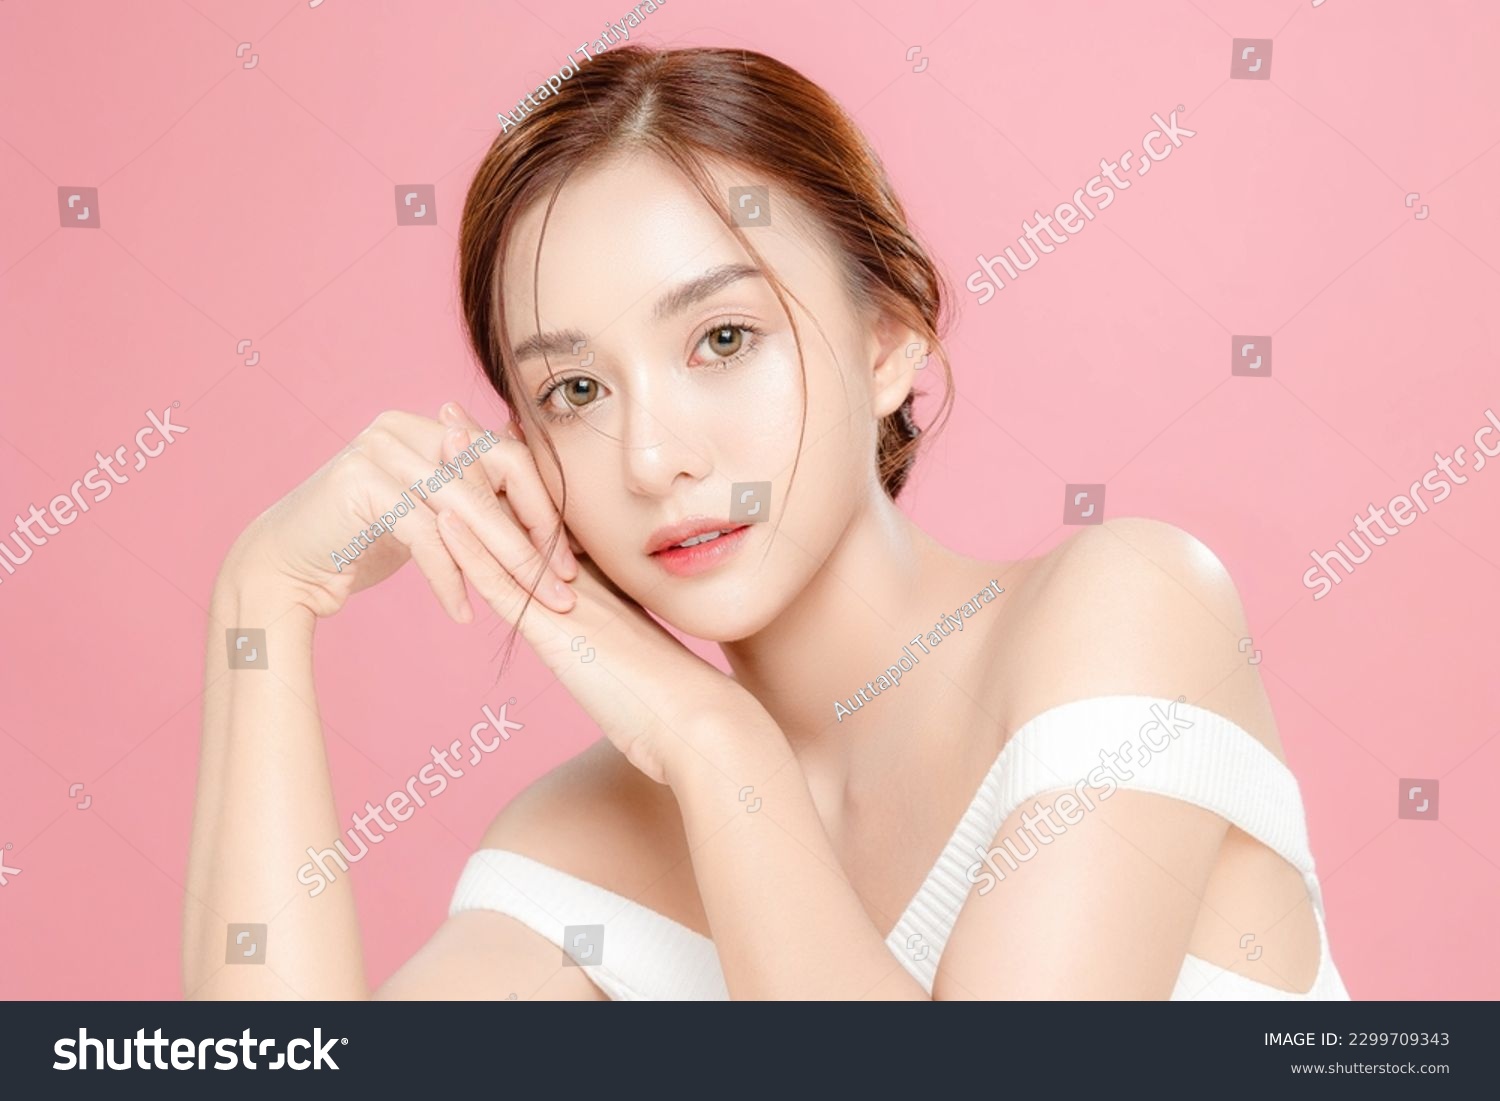 Young Asian beauty woman pulled back hair with korean makeup style on face and perfect skin on isolated pink background. Facial treatment, Cosmetology, plastic surgery. #2299709343